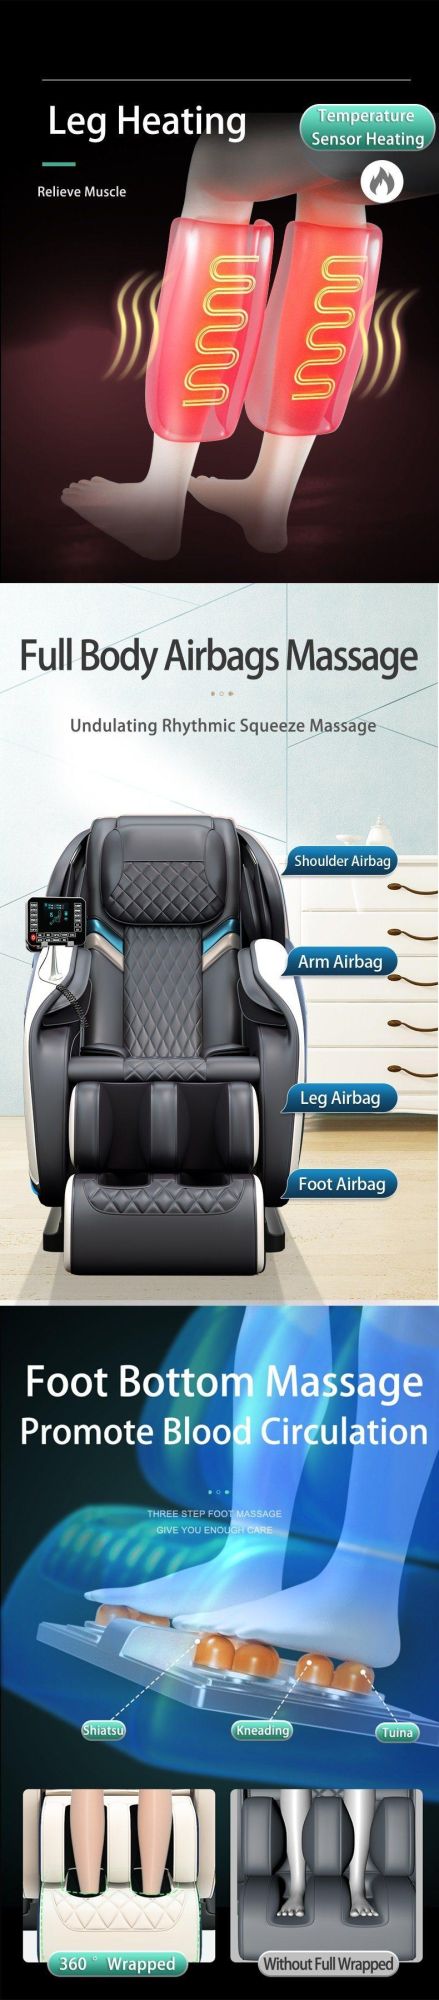 Promotional High Quality Long Duration Time 3D Cheap Price Massage Chair 1800b